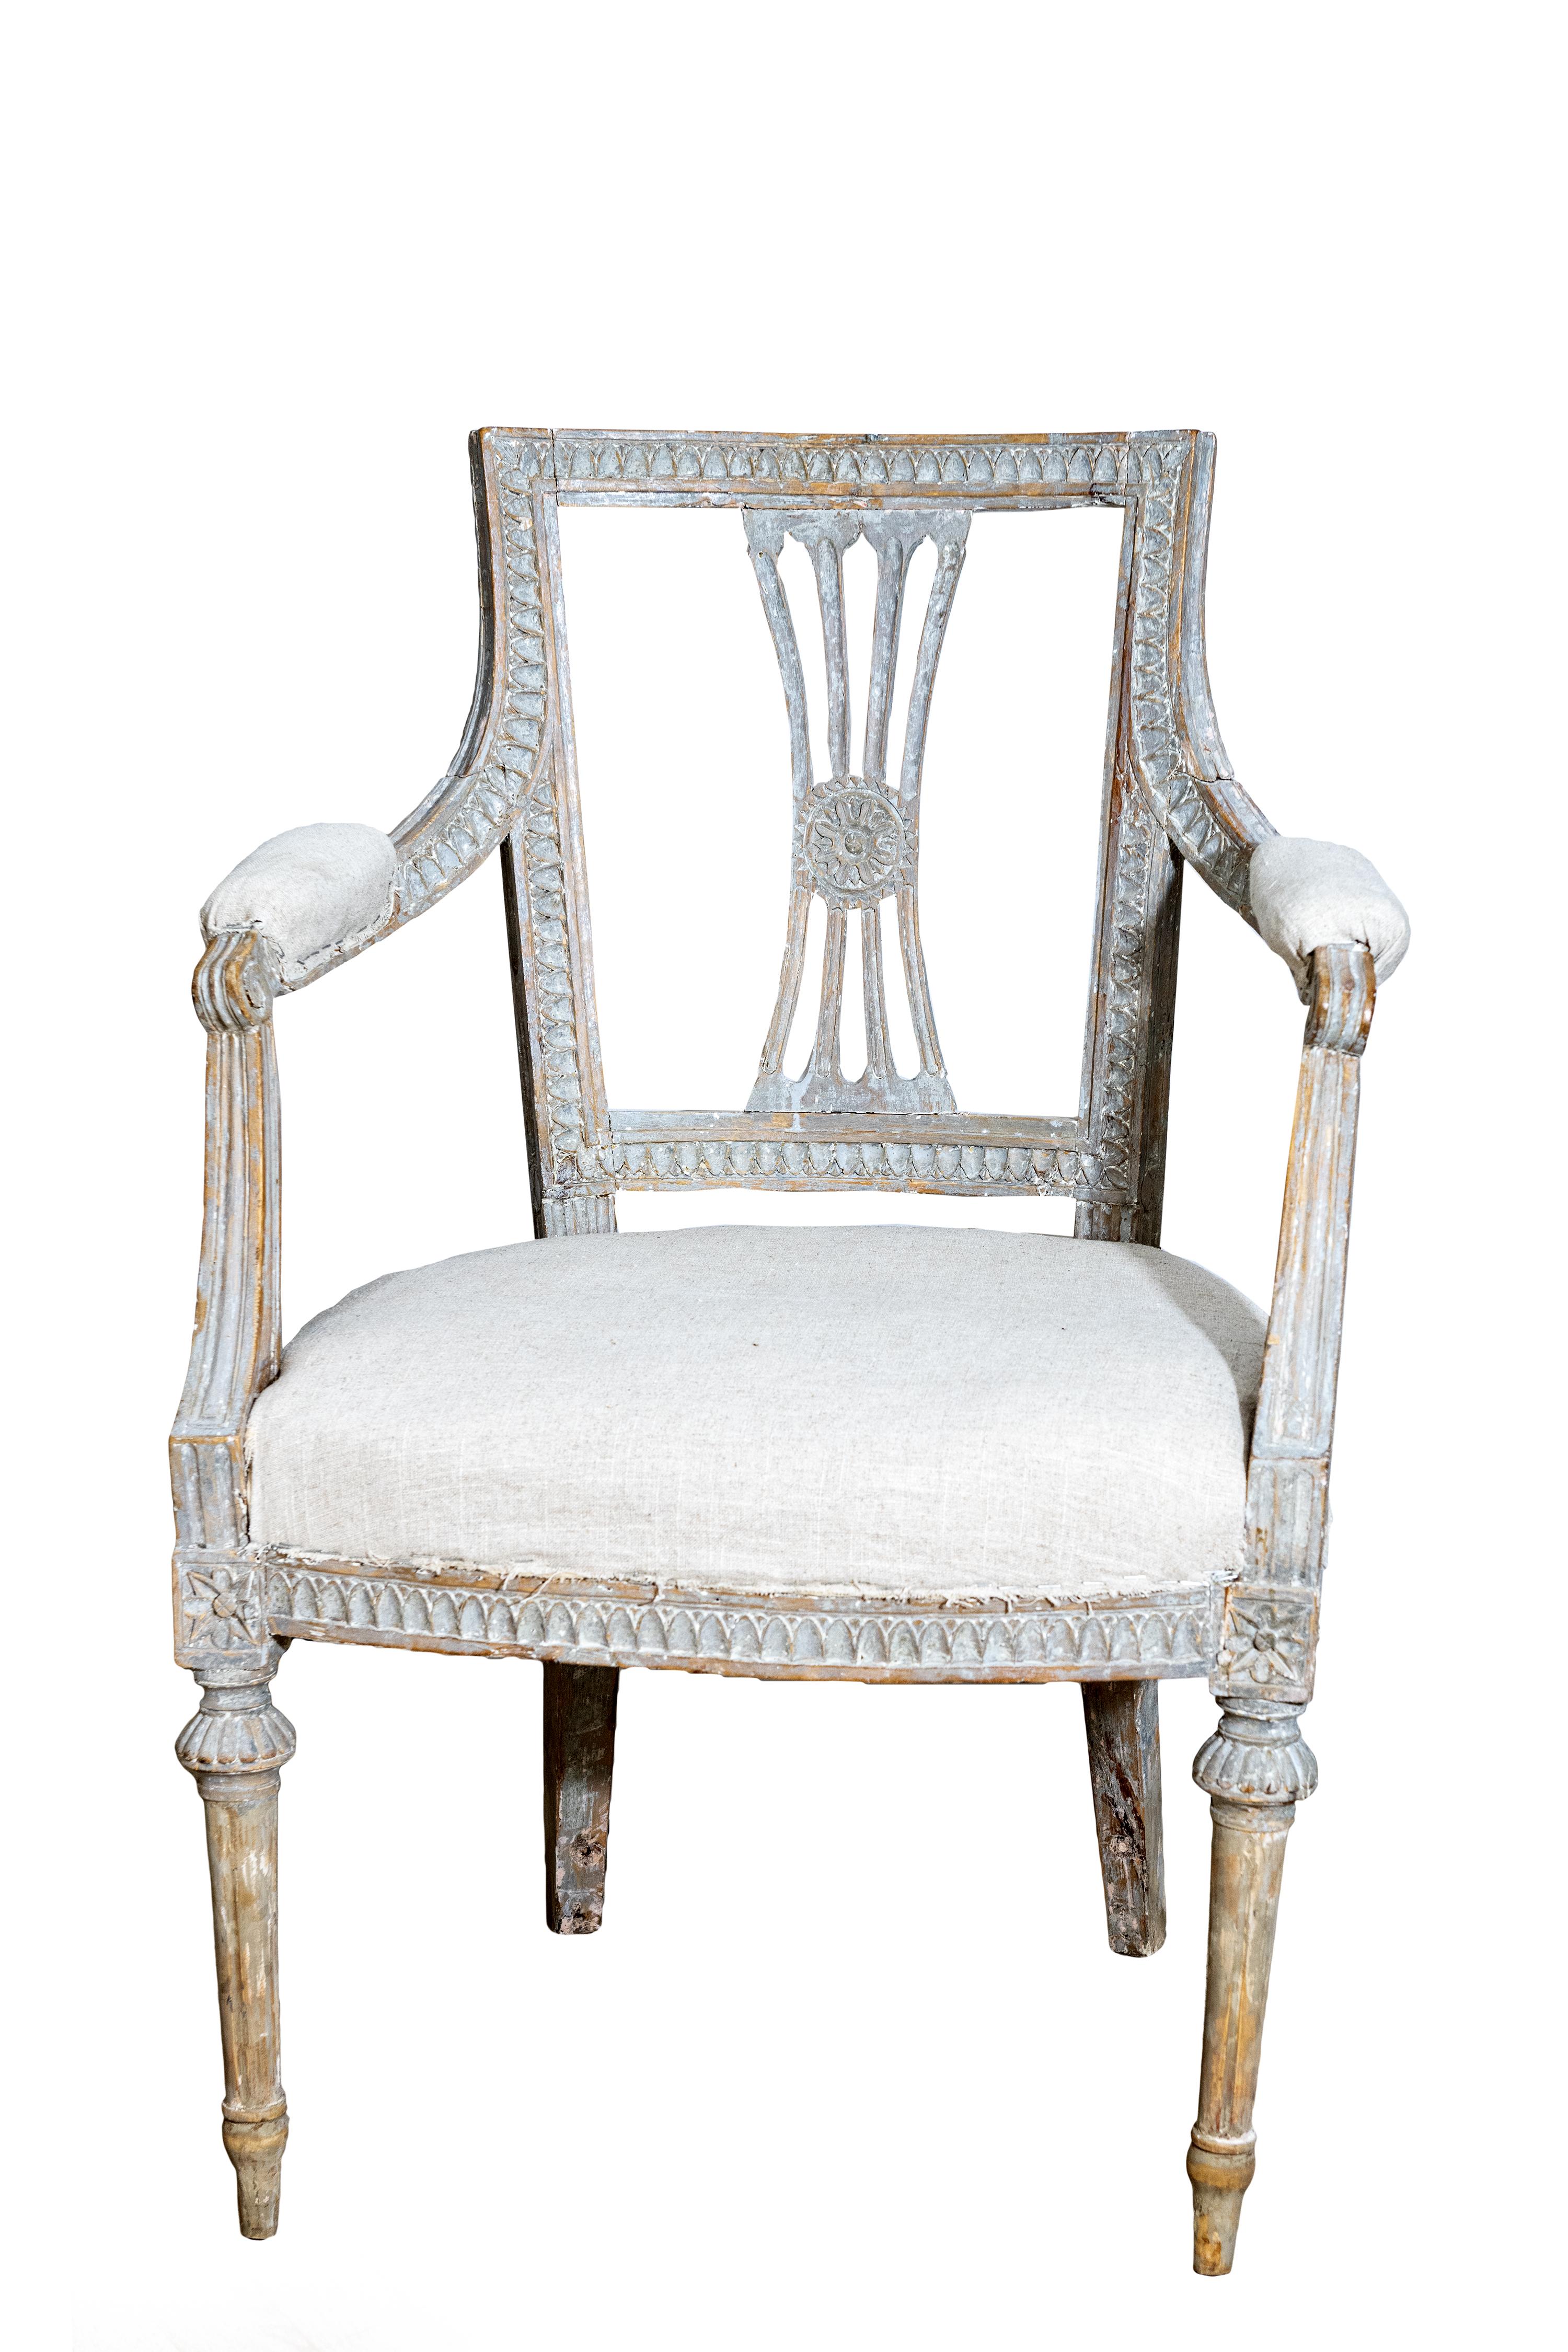 Matched Set of Six Painted Gustavian Dining Chairs, 2 Armchairs and 4 Chairs 4